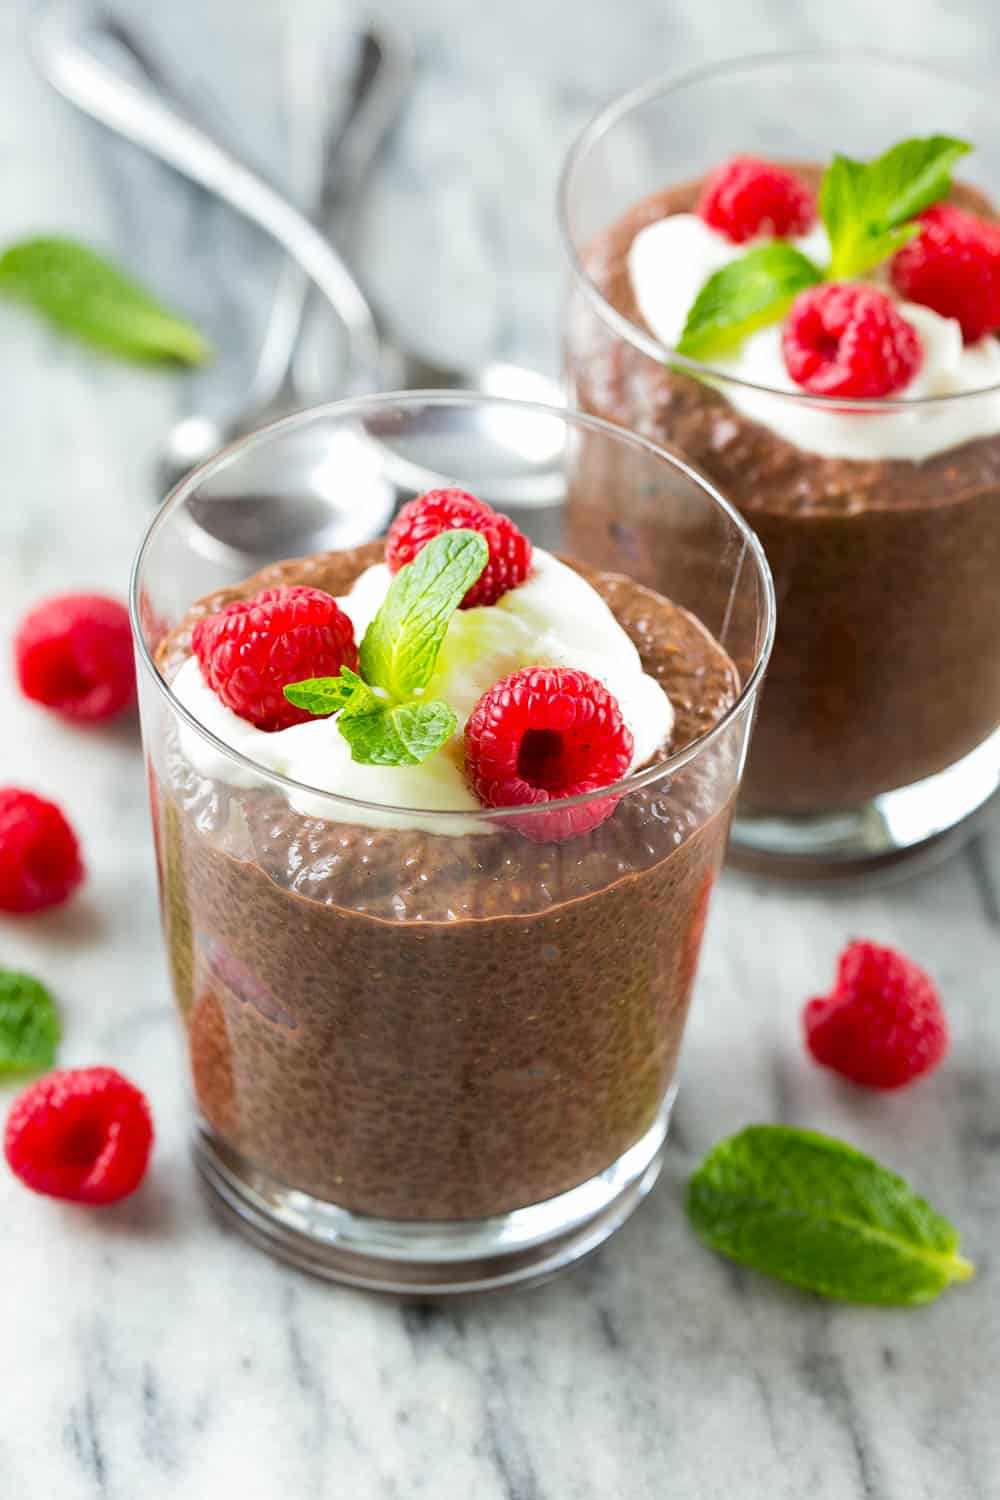 Easy Chocolate Chia Protein Pudding Recipe Healthy Fitness Meals